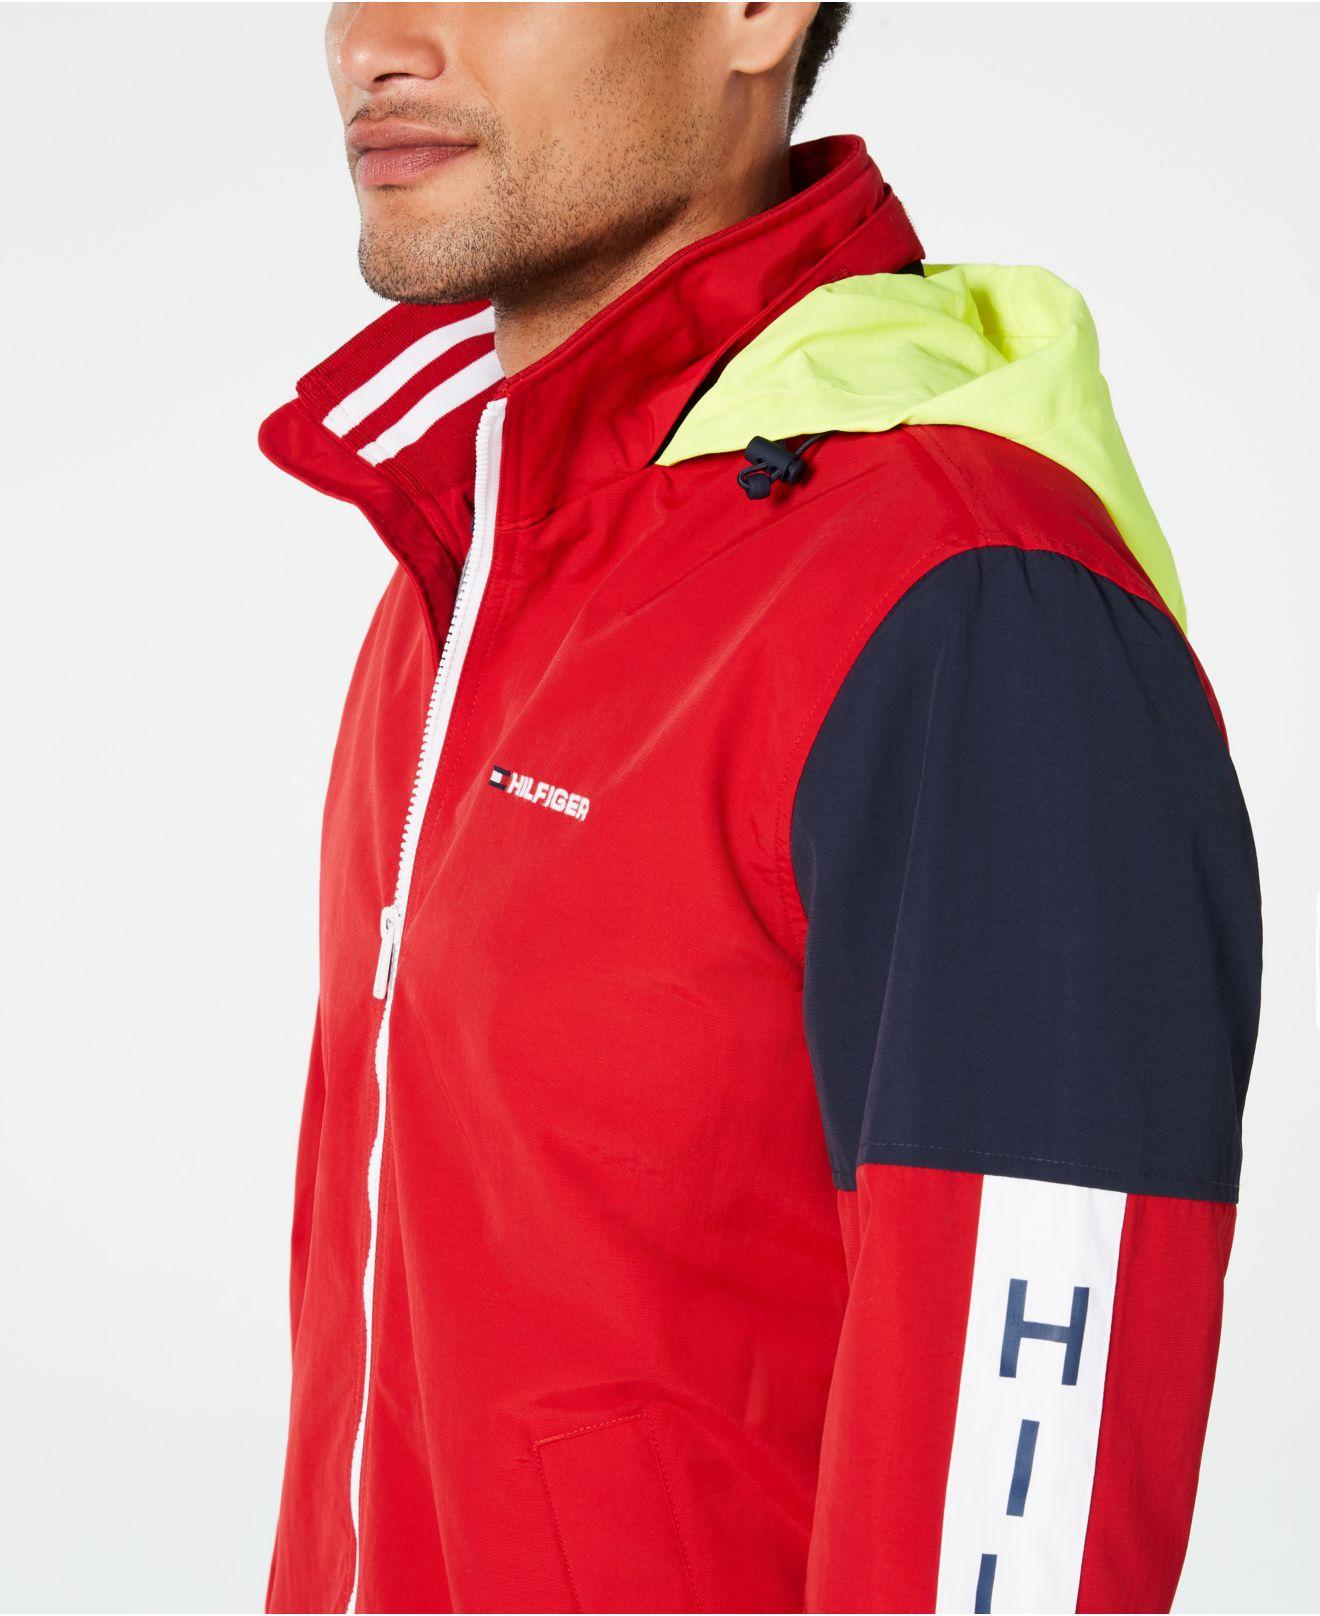 tommy hilfiger harbor town,New daily offers,muammerzora.com